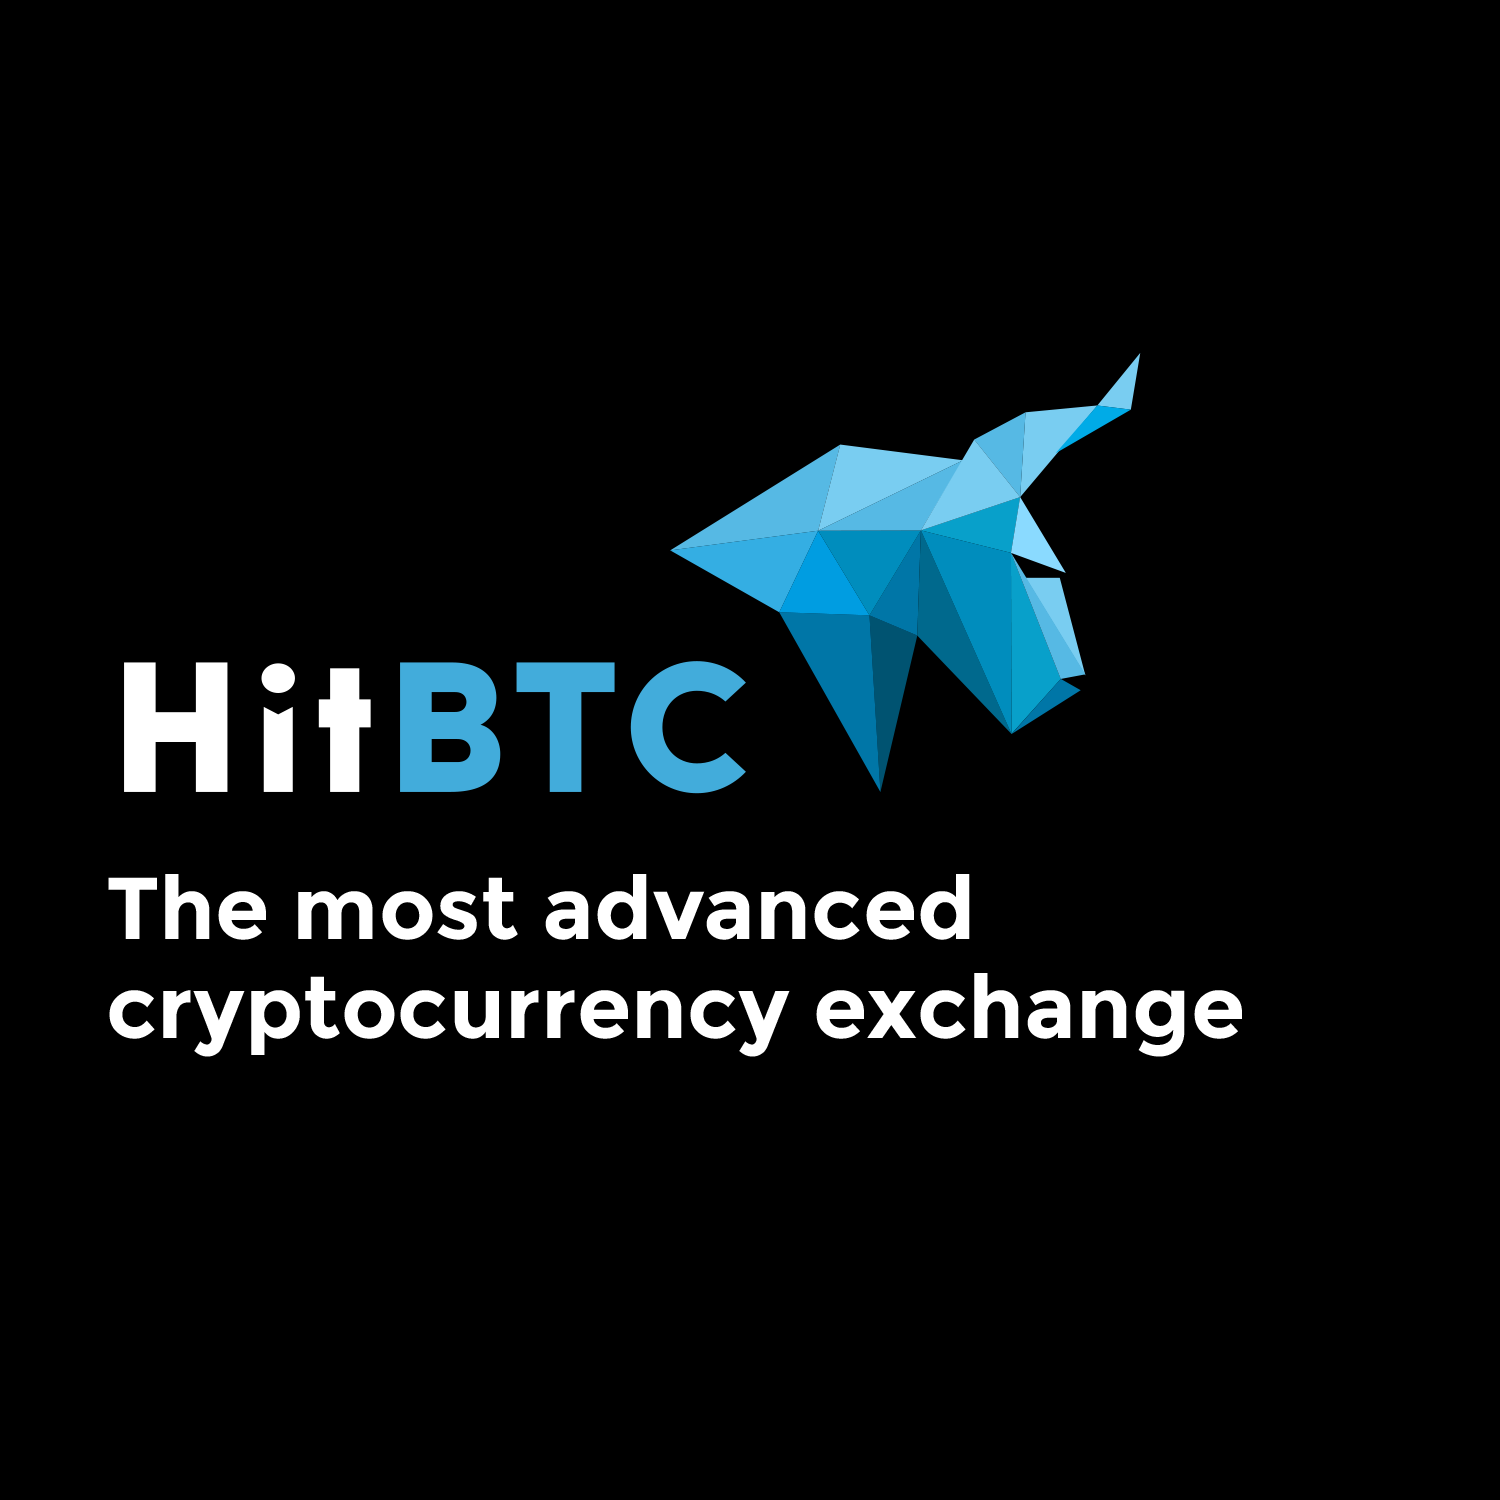 How to i upgrade account ont hitbtc can a county really outlaw cryptocurrency